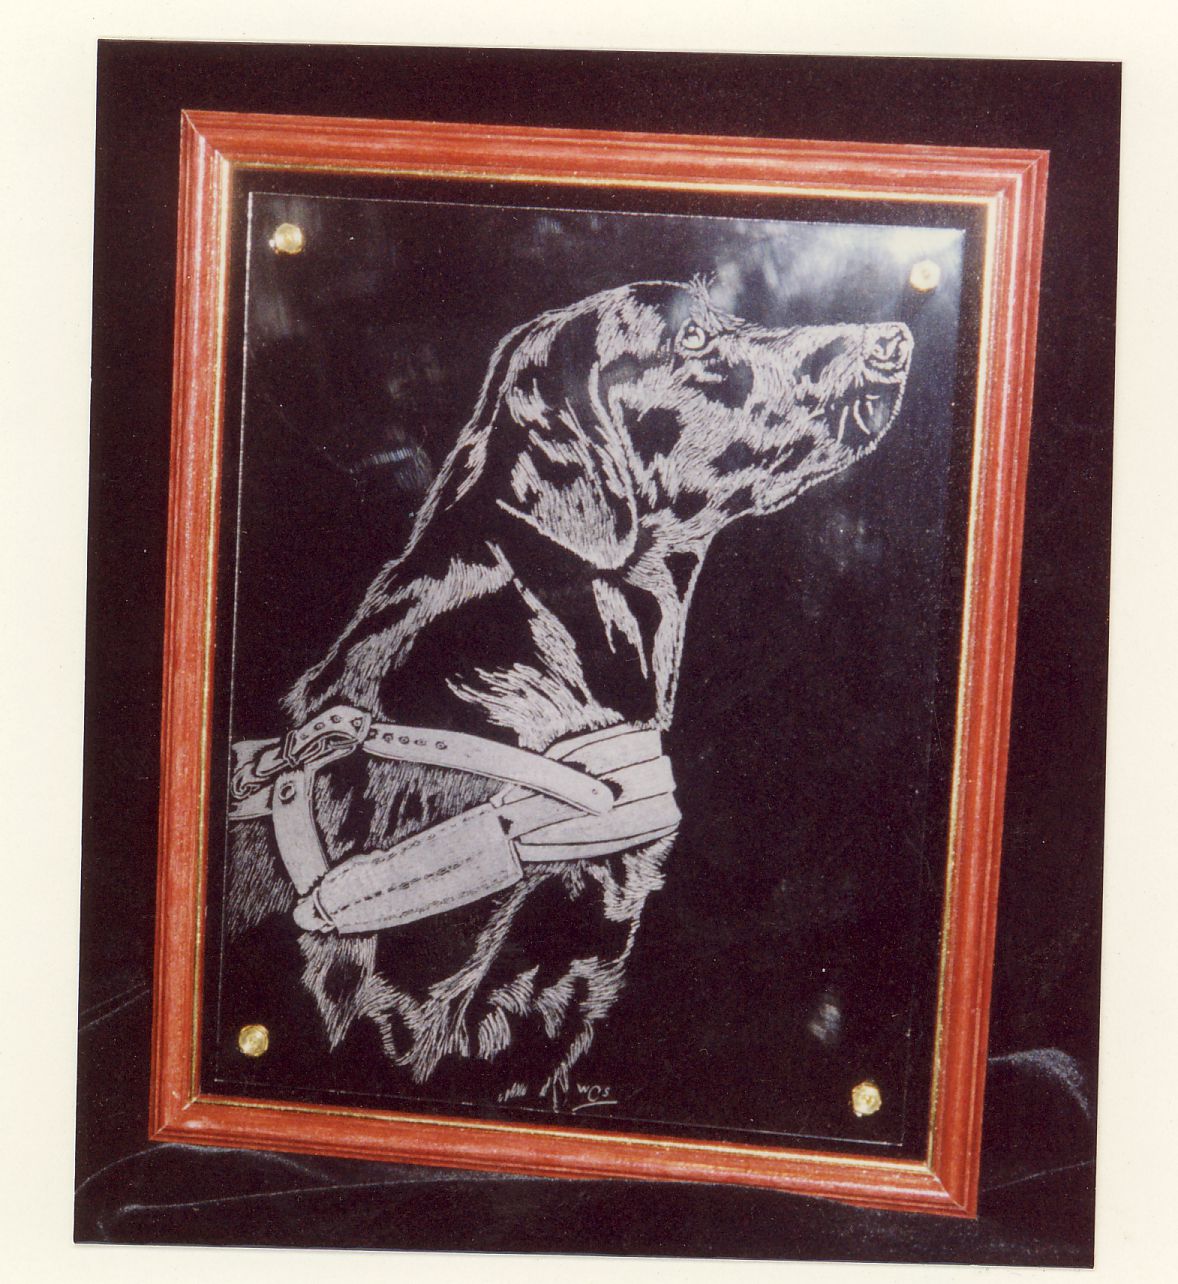 An engraving completed by me for a friend who was active in the training of Guide dogs. This is again engraved by hand on a flat glass and mounted on brass pillars above a black velvet background. This gives the engraving depth of field.